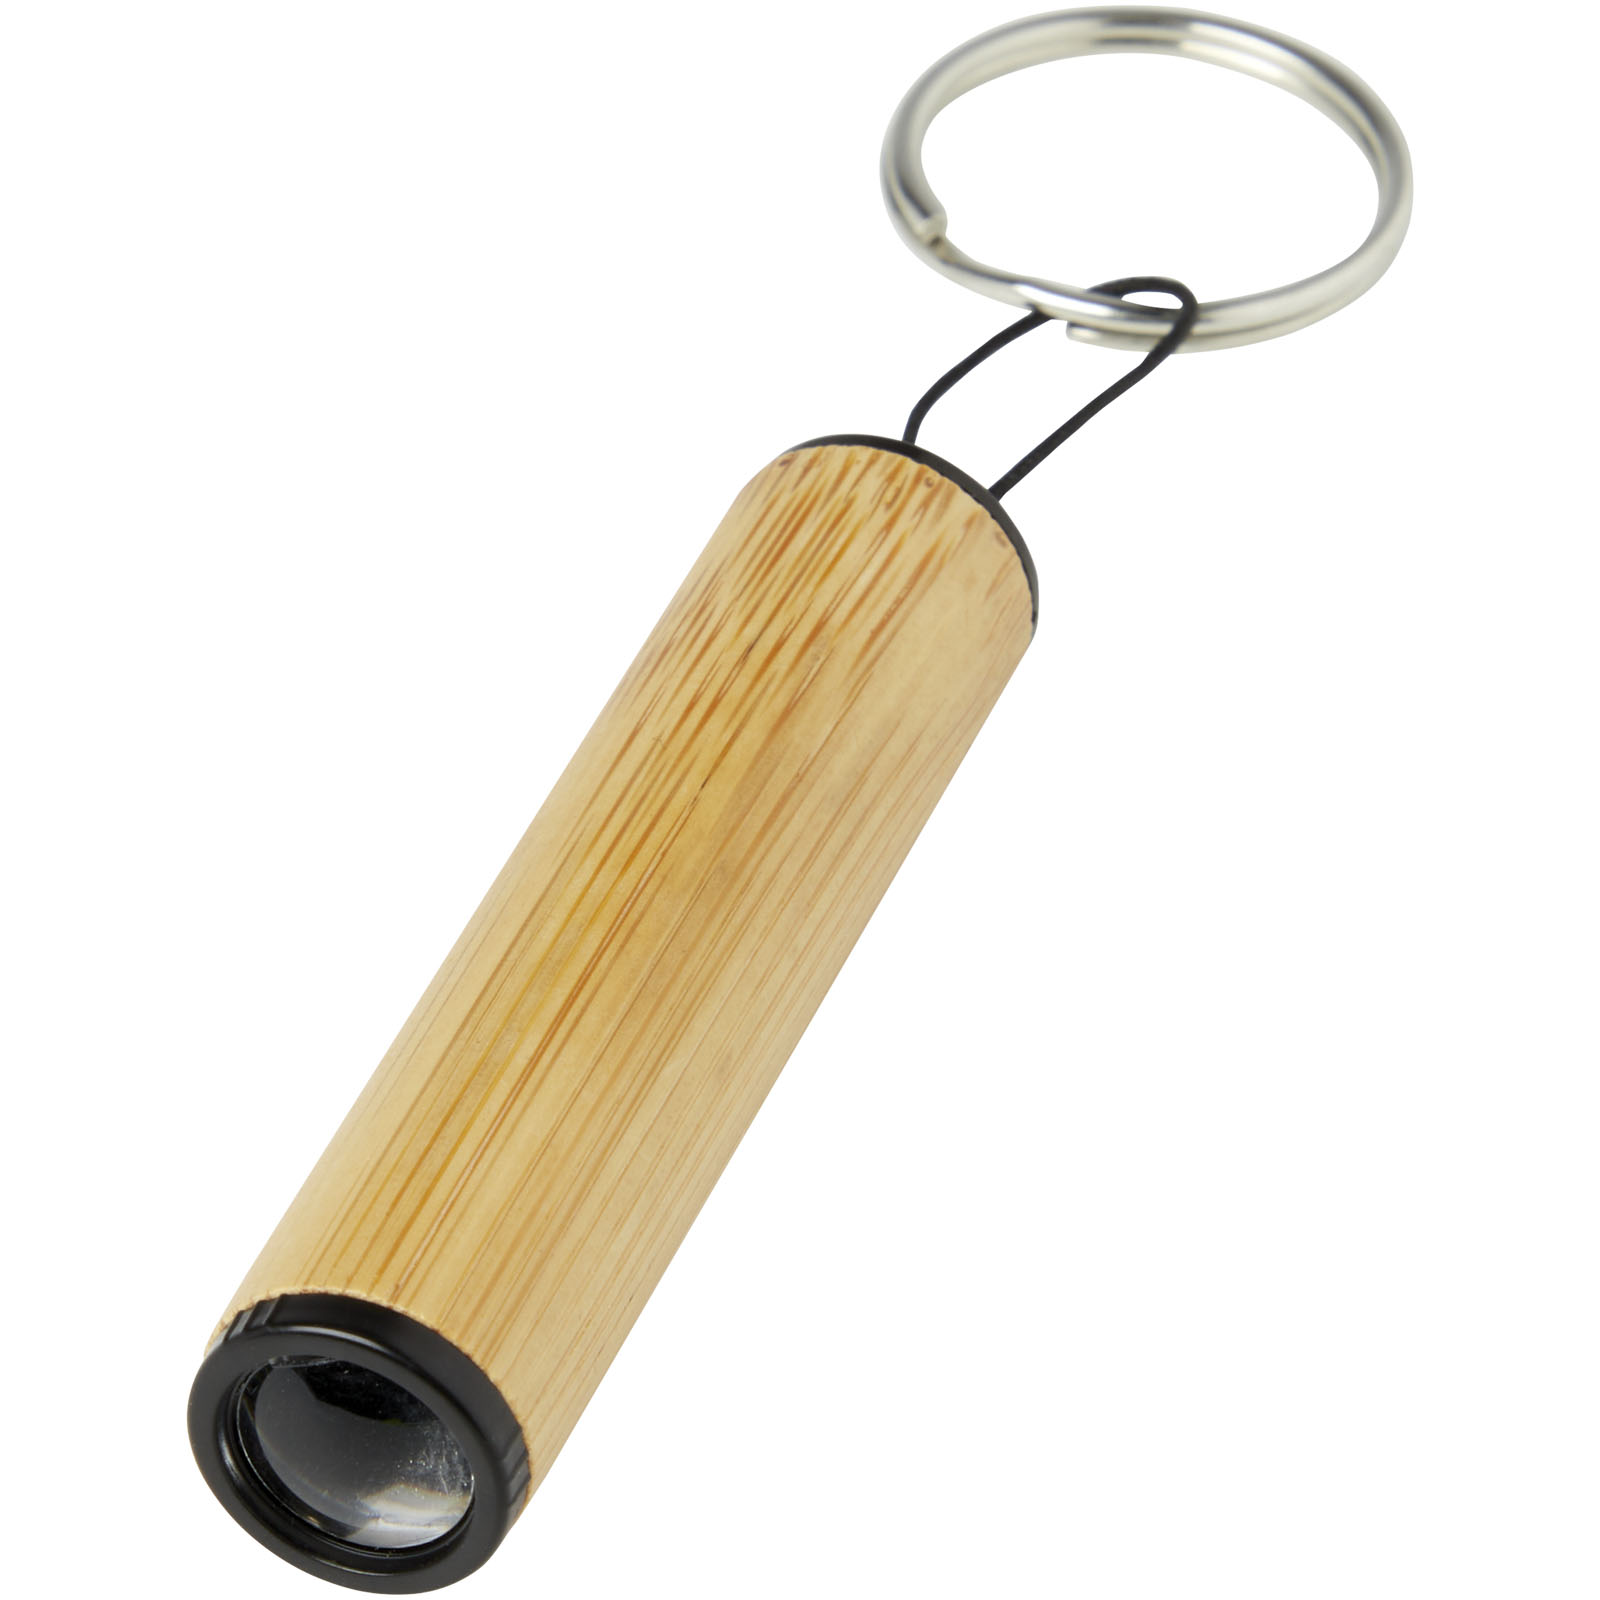 Tools & Car Accessories - Cane bamboo key ring with light